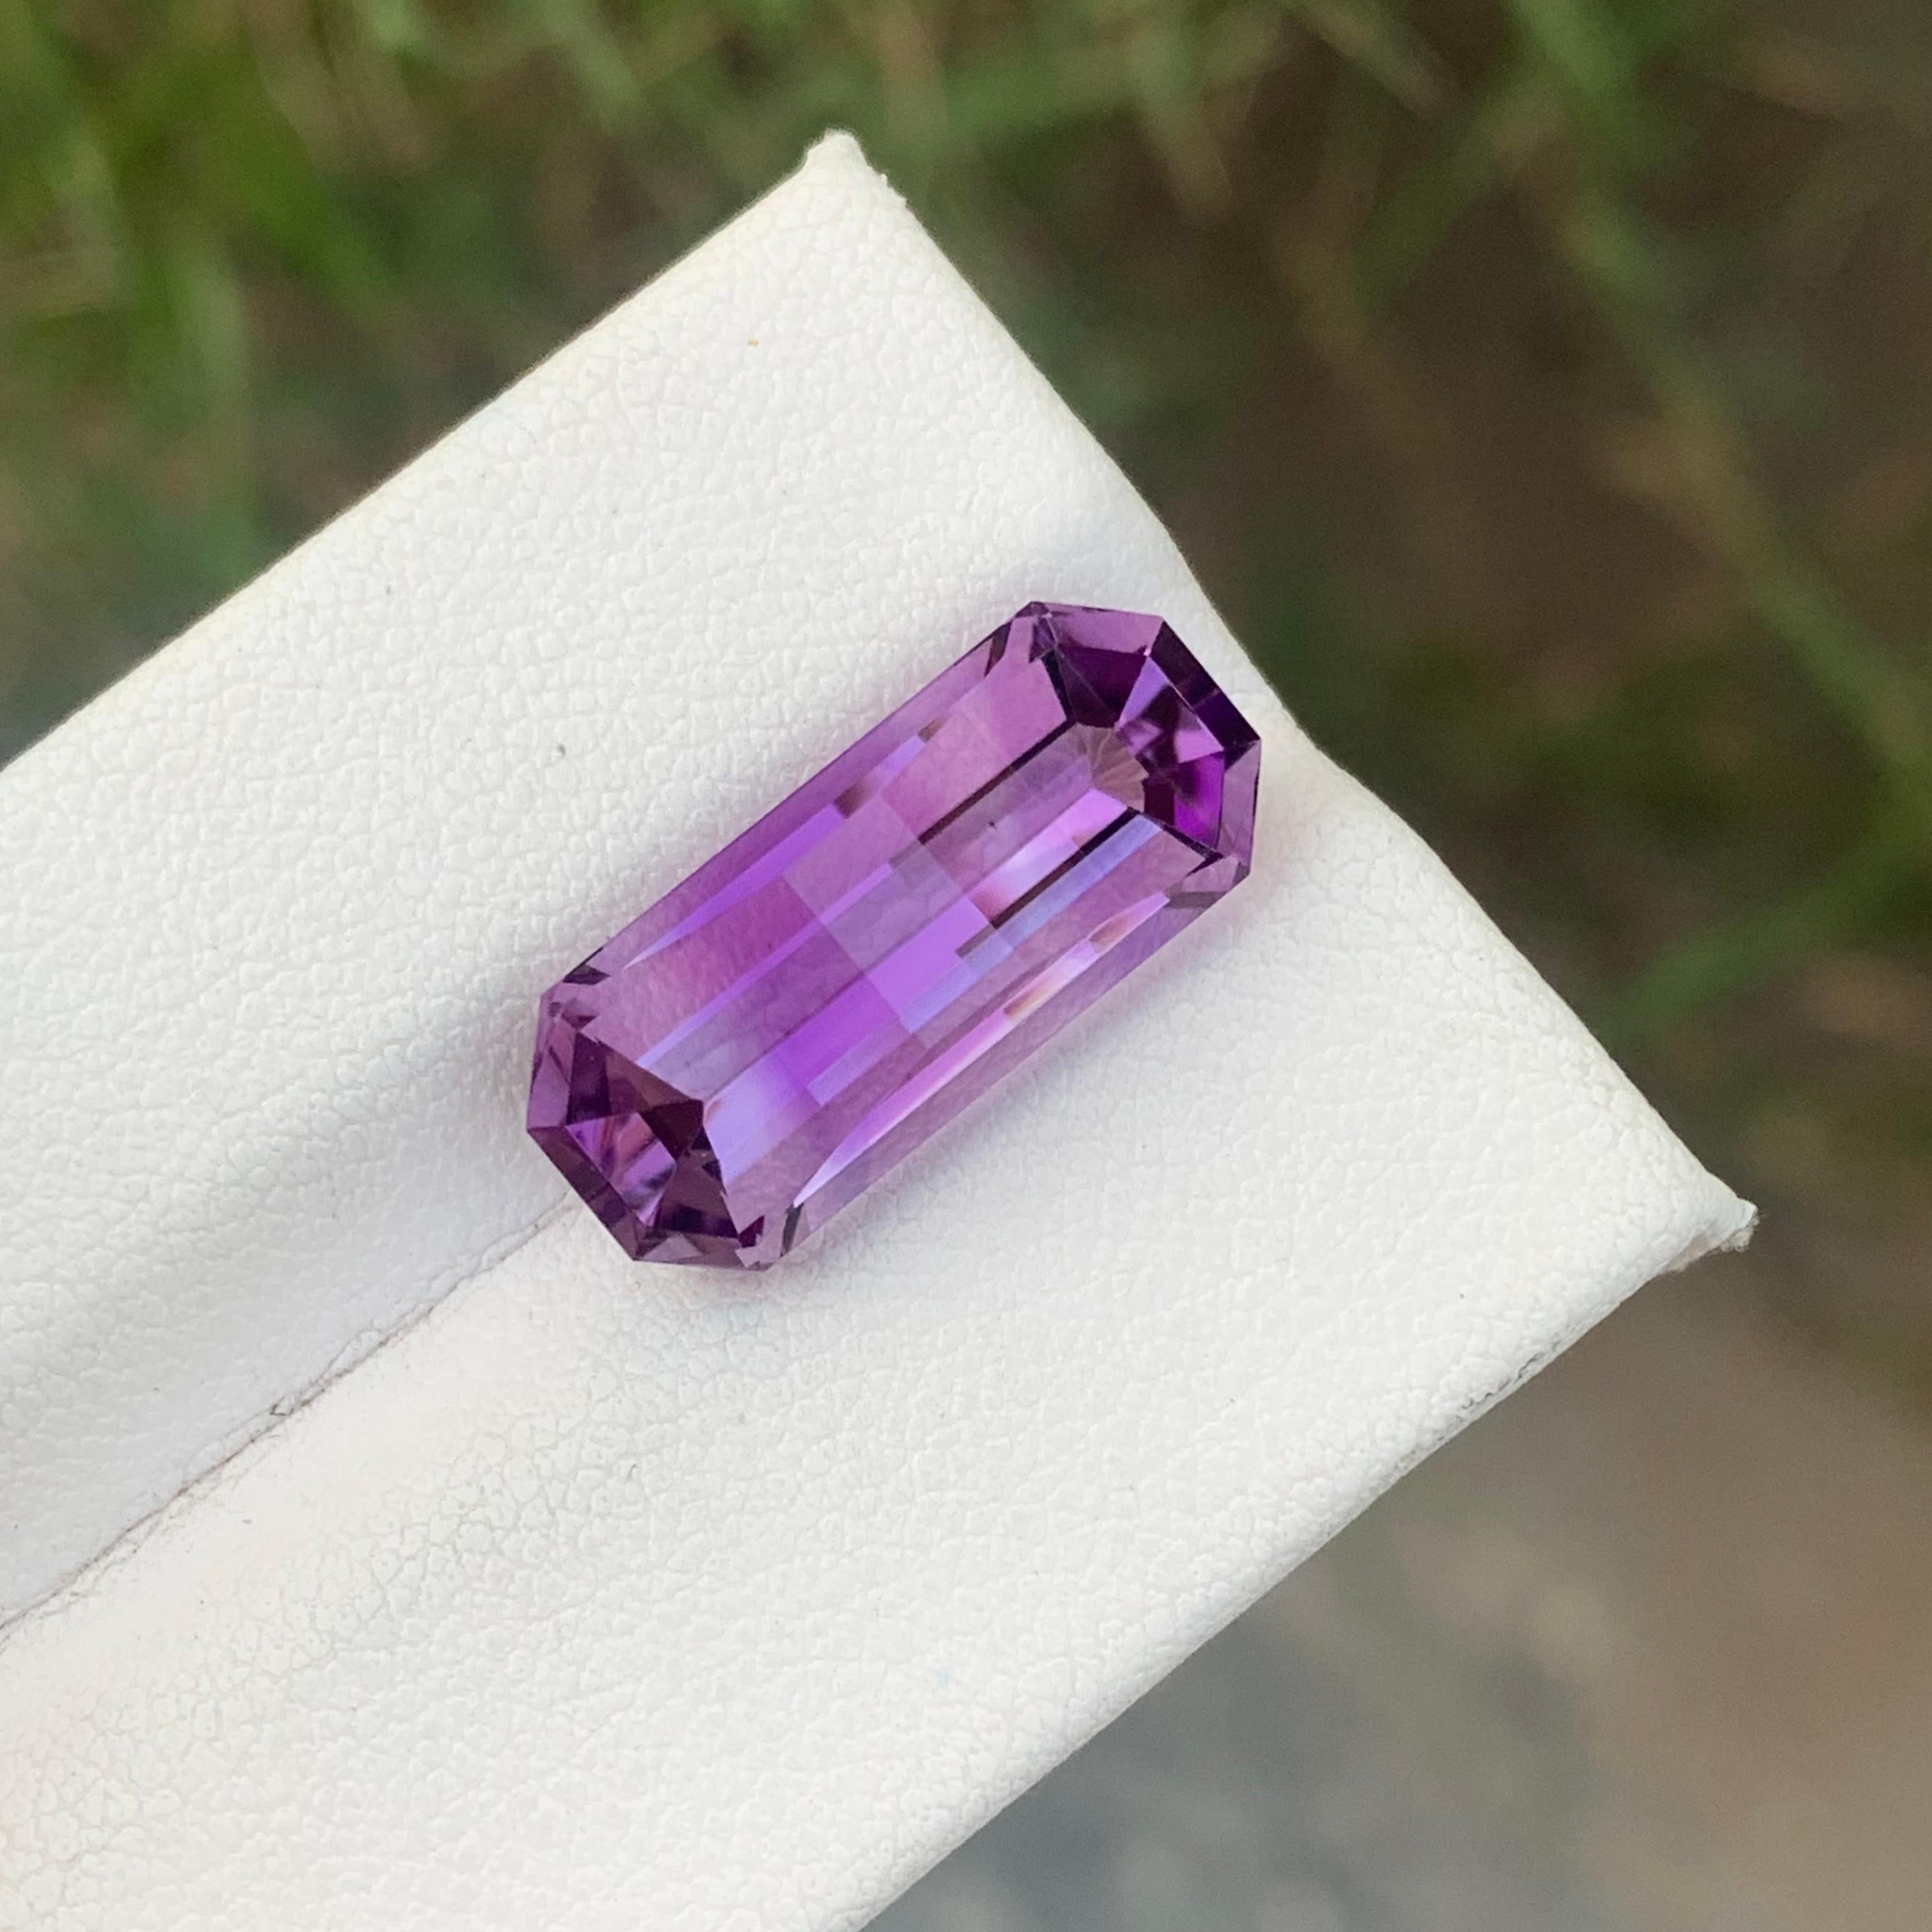 8.25cts Natural Loose Amethyst Gemstone Pixel Pixelated Cut From Brazil Mine For Sale 5